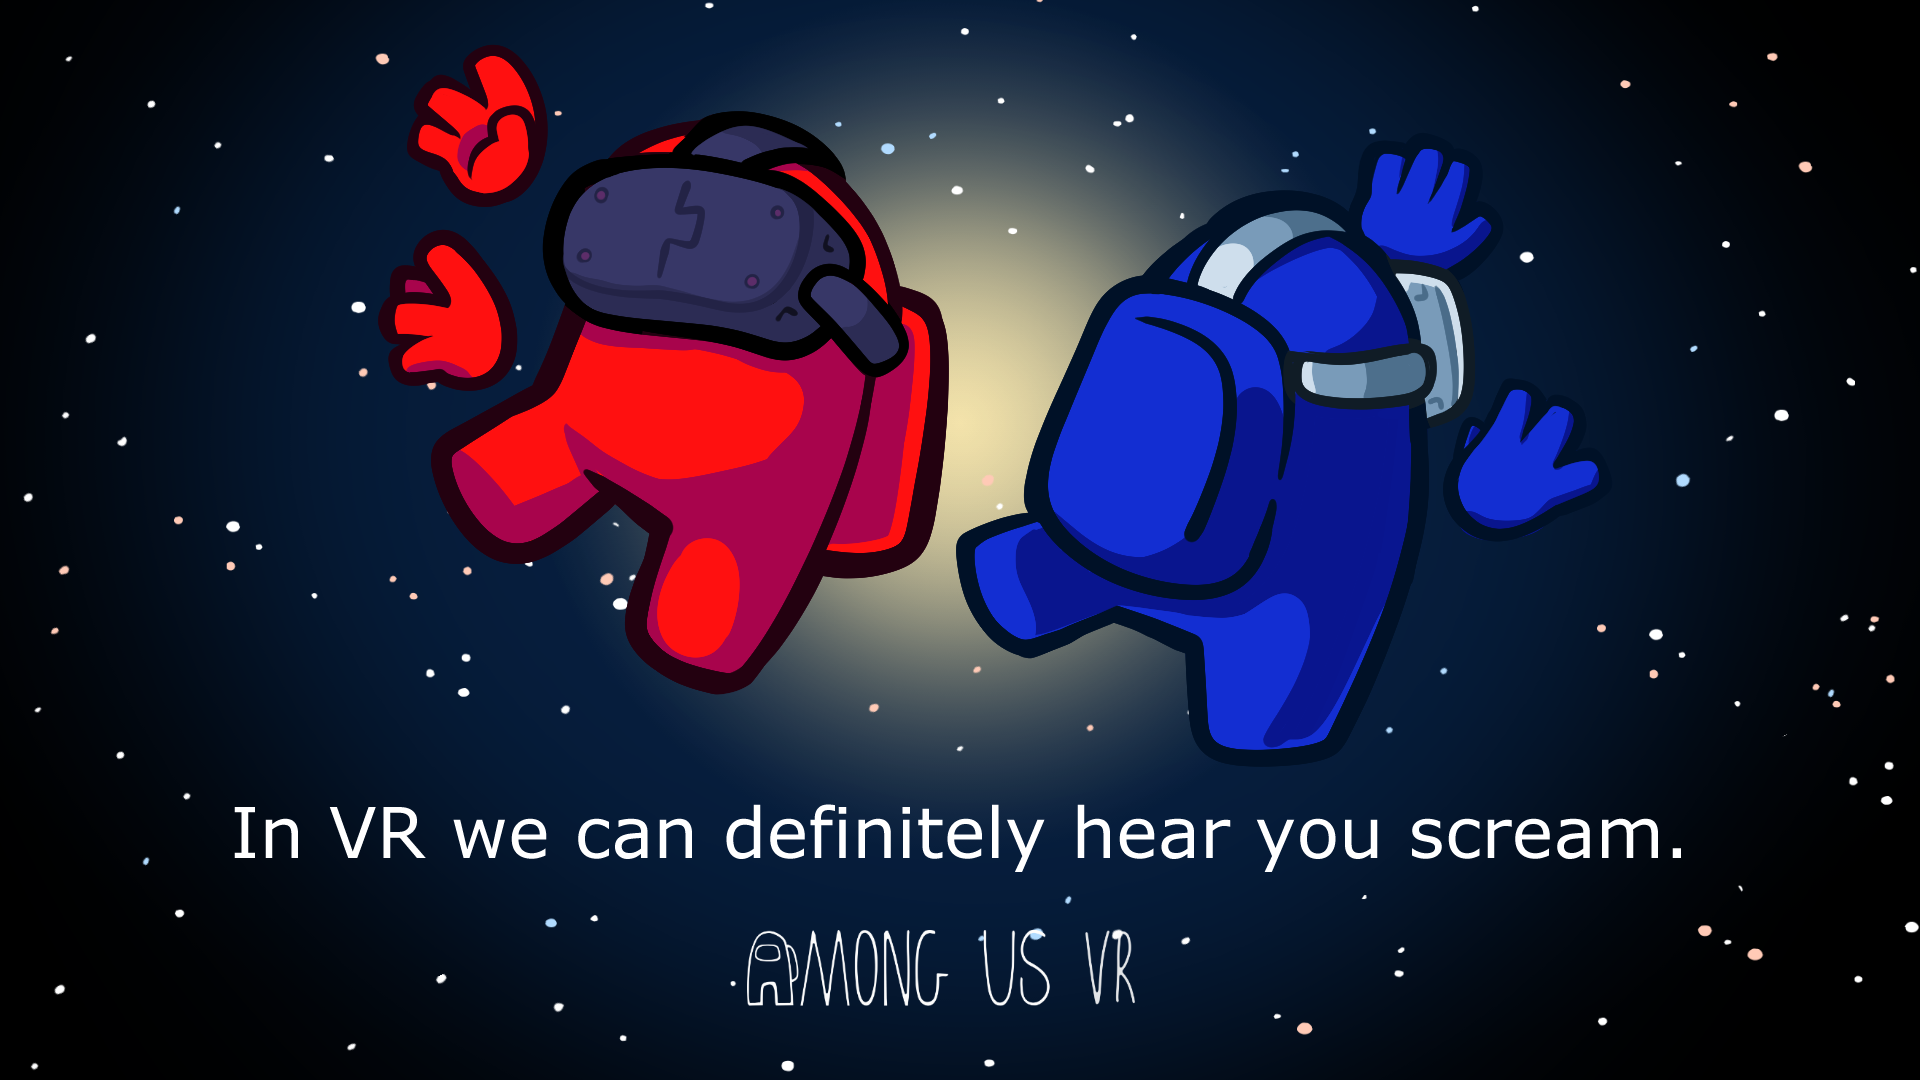 New Among Us VR Trailer and Discord Server!  Innersloth - Creators of  Among Us and The Henry Stickmin Collection!